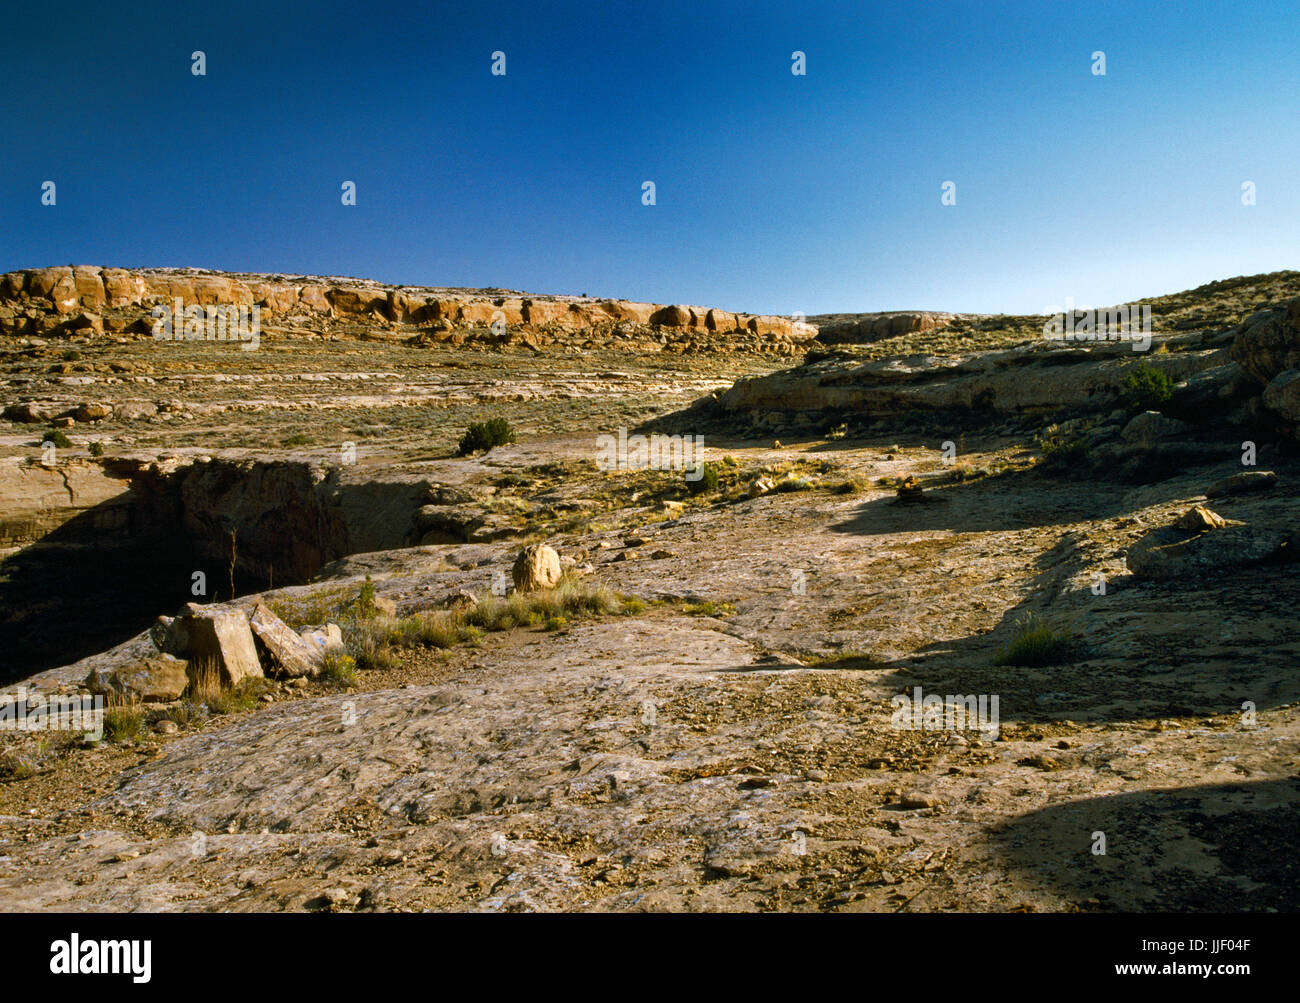 View NNW of part of the Chacoan road system across a cleared section of slickrock on Alto Mesa above Chetro Ketl Pueblo, Chaco Canyon, New Mexico. Stock Photo